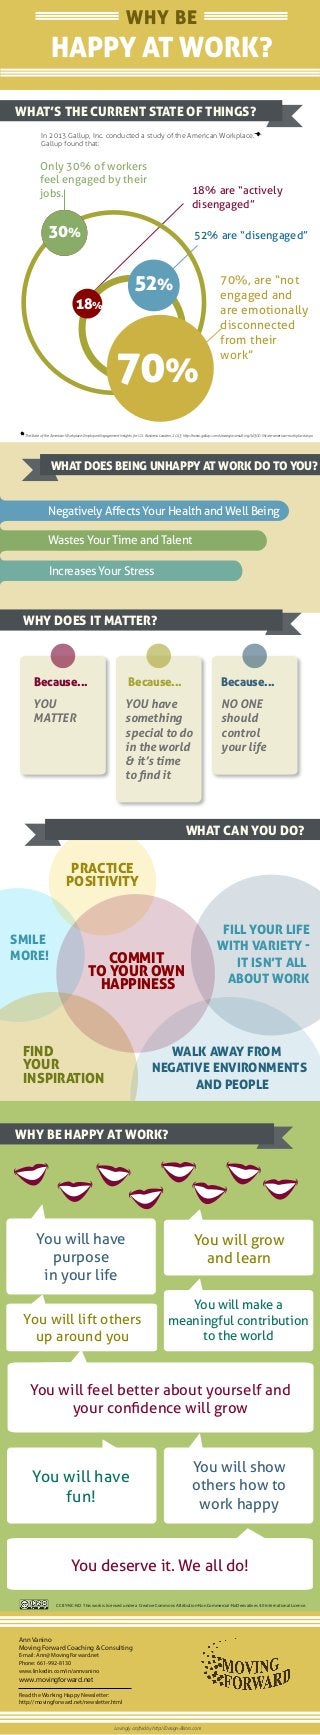 FILL YOUR LIFE
WITH VARIETY -
IT ISN’T ALL
ABOUT WORK
WALK AWAY FROM
NEGATIVE ENVIRONMENTS
AND PEOPLE
COMMIT
TO YOUR OWN
HAPPINESS
FIND
YOUR
INSPIRATION
SMILE
MORE!
PRACTICE
POSITIVITY
WHY BE
HAPPY AT WORK?
70%
30%
52%
18%
18% are “actively
disengaged”
52% are “disengaged”
70%, are “not
engaged and
are emotionally
disconnected
from their
work”
Only 30% of workers
feel engaged by their
jobs.
WHY DOES IT MATTER?
WHAT’S THE CURRENT STATE OF THINGS?
WHAT DOES BEING UNHAPPY AT WORK DO TO YOU?
Increases Your Stress
Wastes Your Time and Talent
Negatively Aﬀects Your Health and Well Being
WHAT CAN YOU DO?
Because...
YOU
MATTER
Because... Because...
YOU have
something
special to do
in the world
& it’s time
to ﬁnd it
NO ONE
should
control
your life
WHY BE HAPPY AT WORK?
You will have
fun!
You will feel better about yourself and
your conﬁdence will grow
You deserve it. We all do!
You will grow
and learn
You will lift others
up around you
You will make a
meaningful contribution
to the world
You will show
others how to
work happy
You will have
purpose
in your life
Ann Vanino
Moving Forward Coaching & Consulting
E-mail: Ann@MovingForward.net
Phone: 661-992-8130
www.linkedin.com/in/annvanino
In 2013 Gallup, Inc. conducted a study of the American Workplace. *
Gallup found that:
*The State of the American Workplace: Employee Engagement Insights for U.S. Business Leaders, 2013, http://www.gallup.com/strategicconsulting/163007/state-american-workplace.aspx
Lovingly crafted by http://Design-Bistro.com
www.movingforward.net
Read the Working Happy Newsletter:
http://movingforward.net/newsletter.html
CC BY-NC-ND This work is licensed under a Creative Commons Attribution-NonCommercial-NoDerivatives 4.0 International License.
 